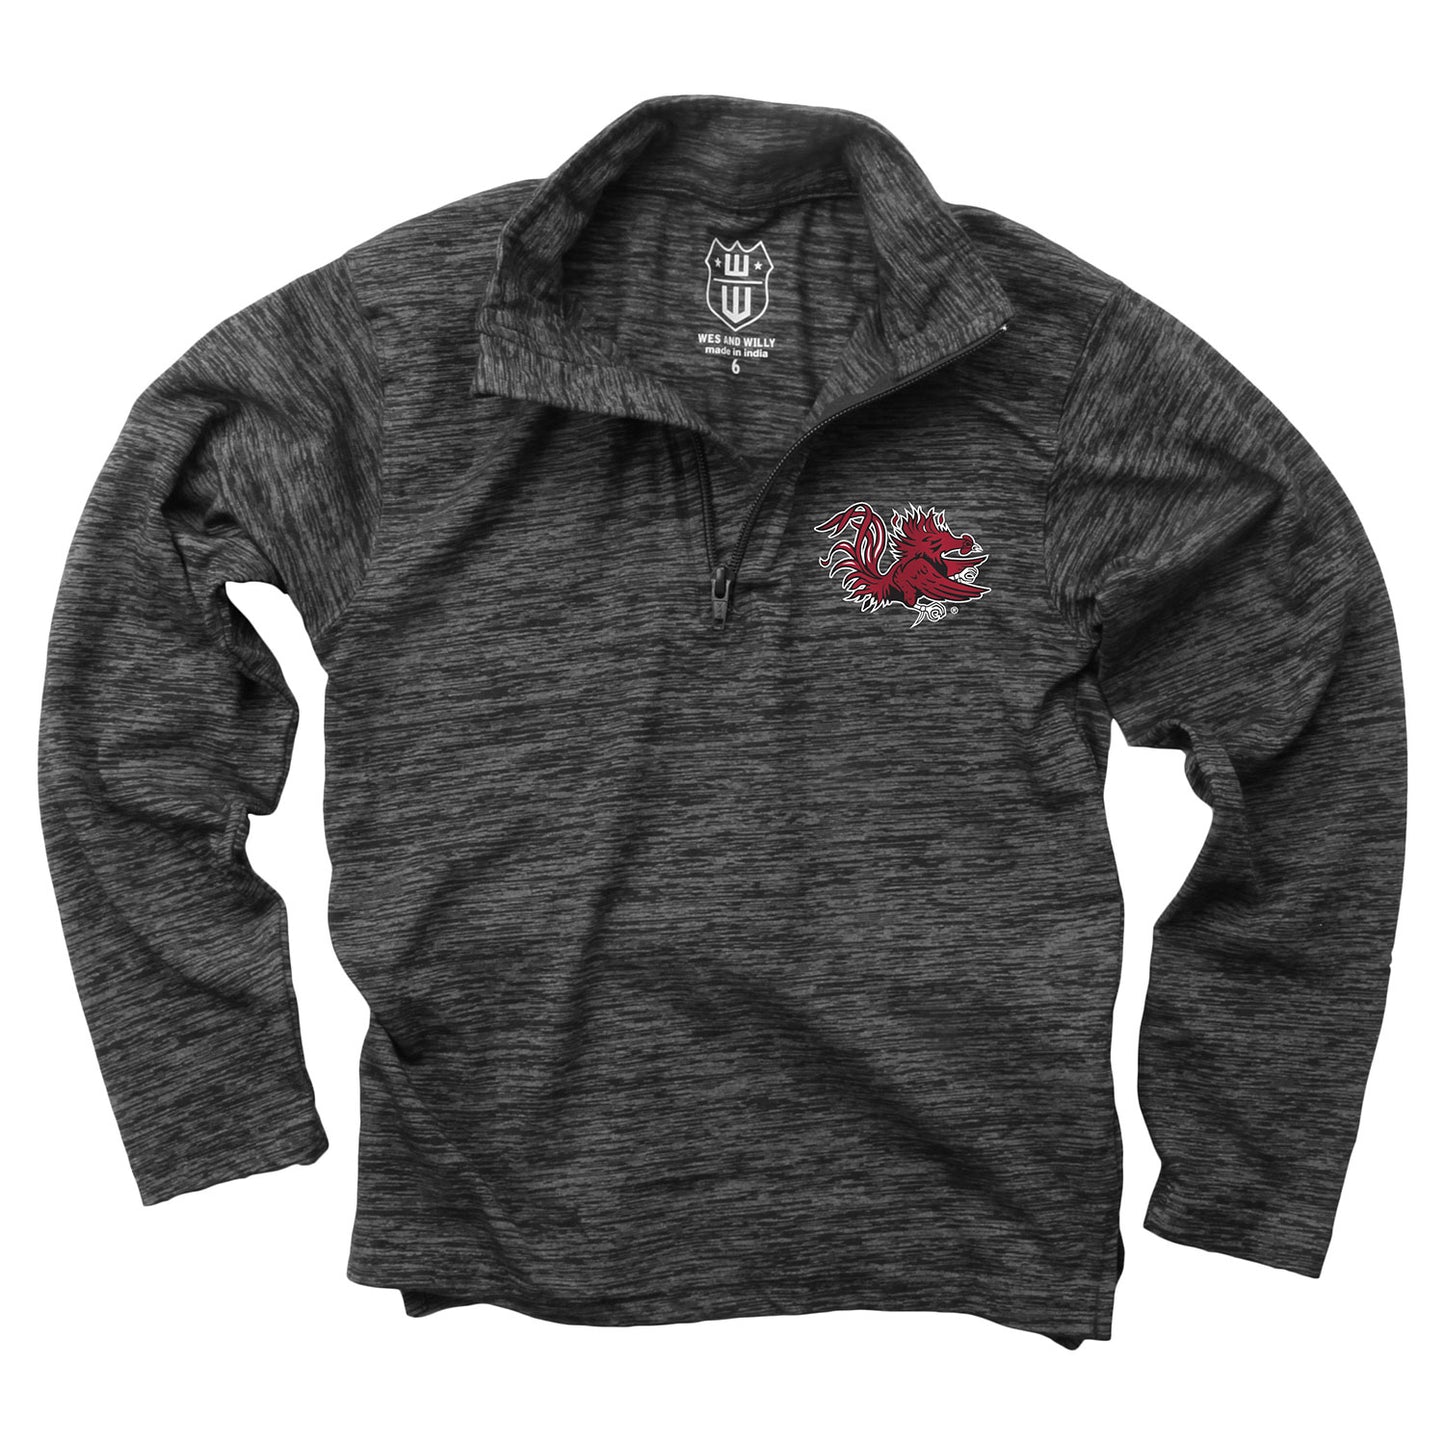 South Carolina Gamecocks Wes and Willy Youth Boys Cloudy Yarn Long Sleeve College Quarter Zip - Black